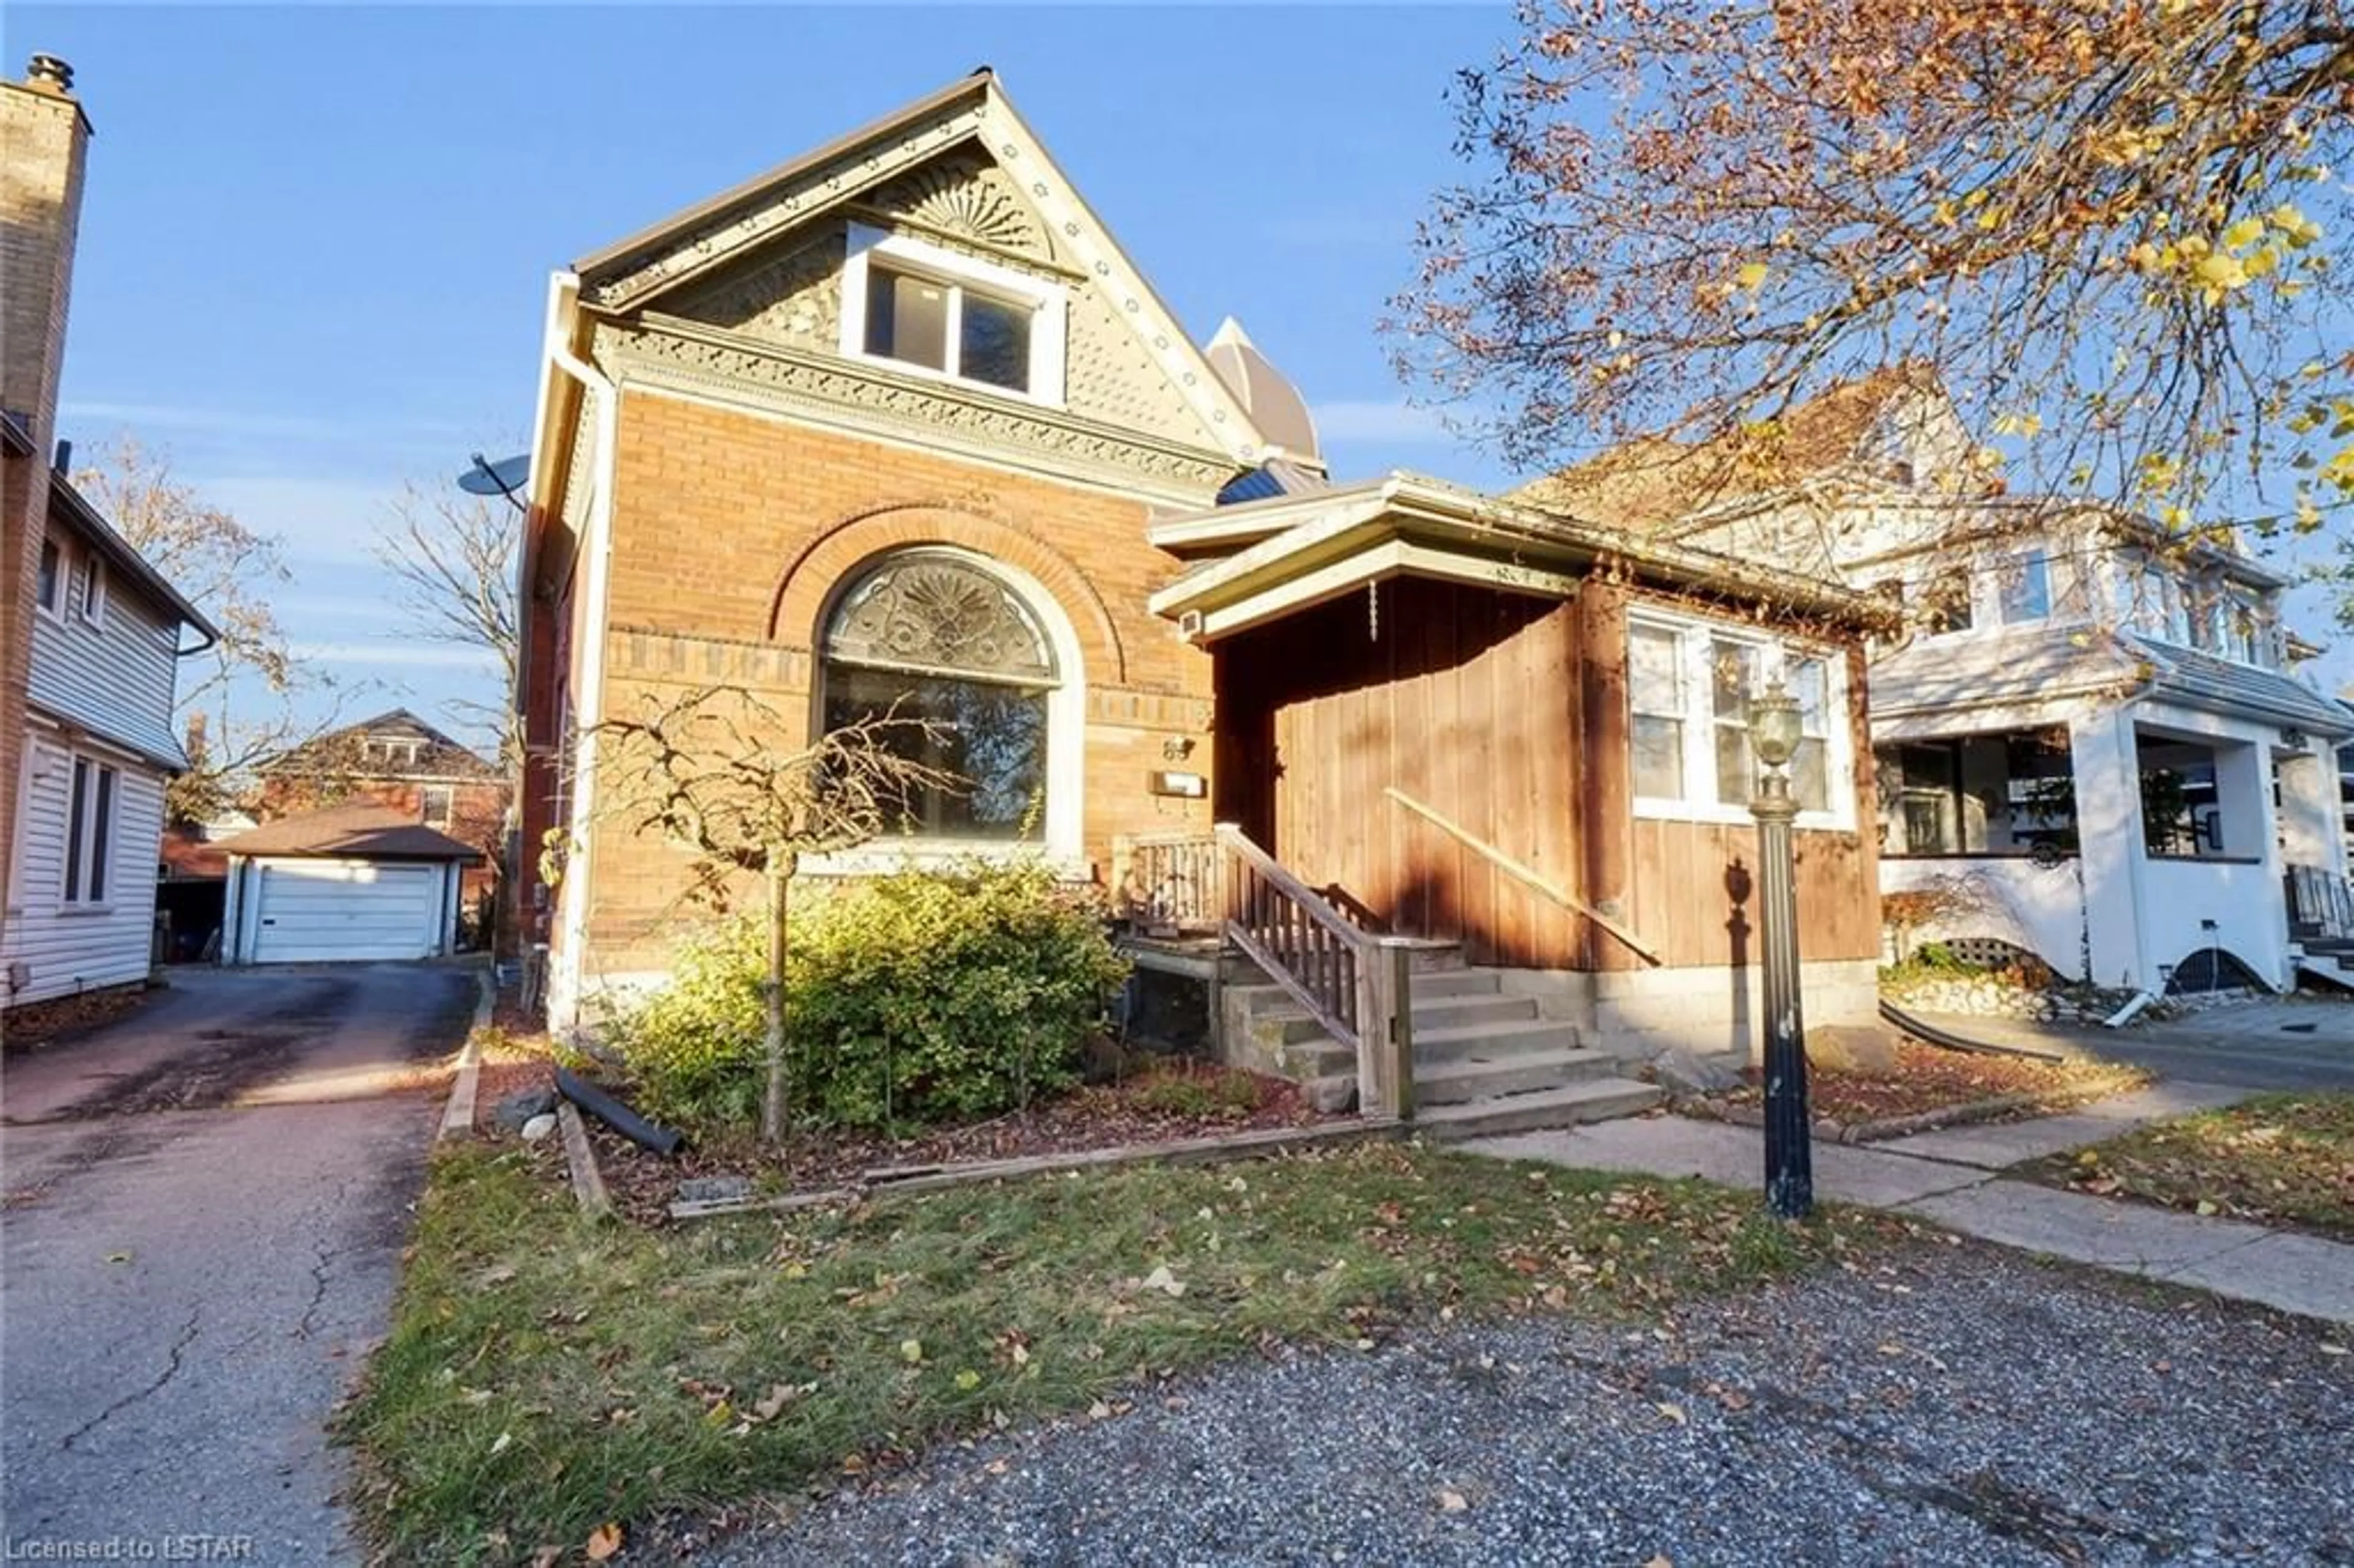 Home with brick exterior material for 89 Gladstone Ave, St. Thomas Ontario N5R 2L9